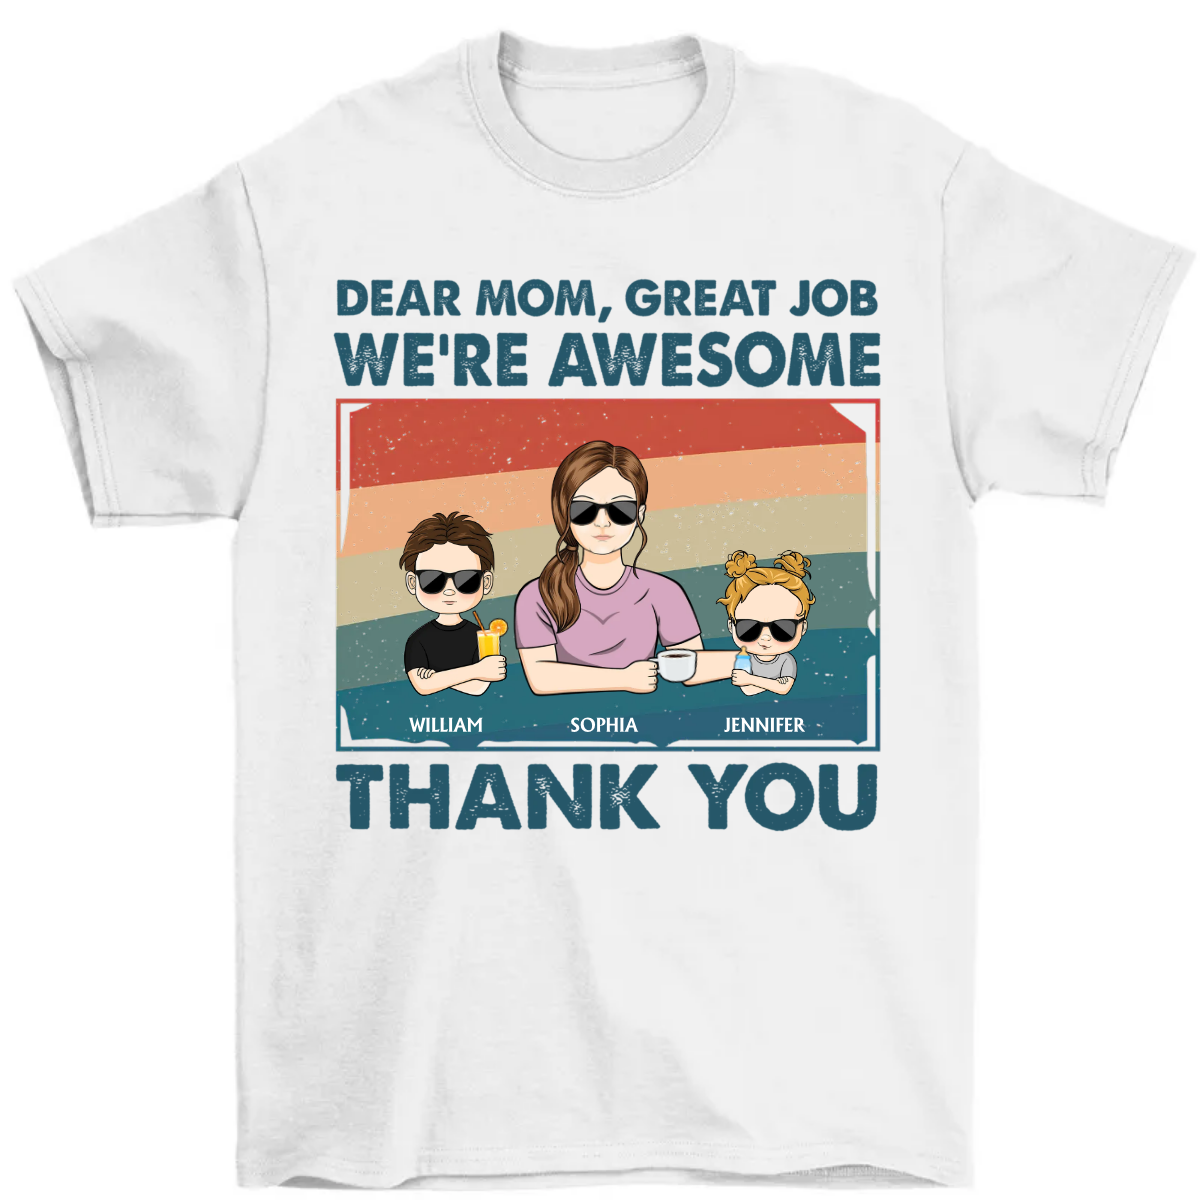 Dear Mom Great Job We're Awesome Thank You - Funny Gift For Mom, Mother, Mama, Grandma - Personalized T Shirt